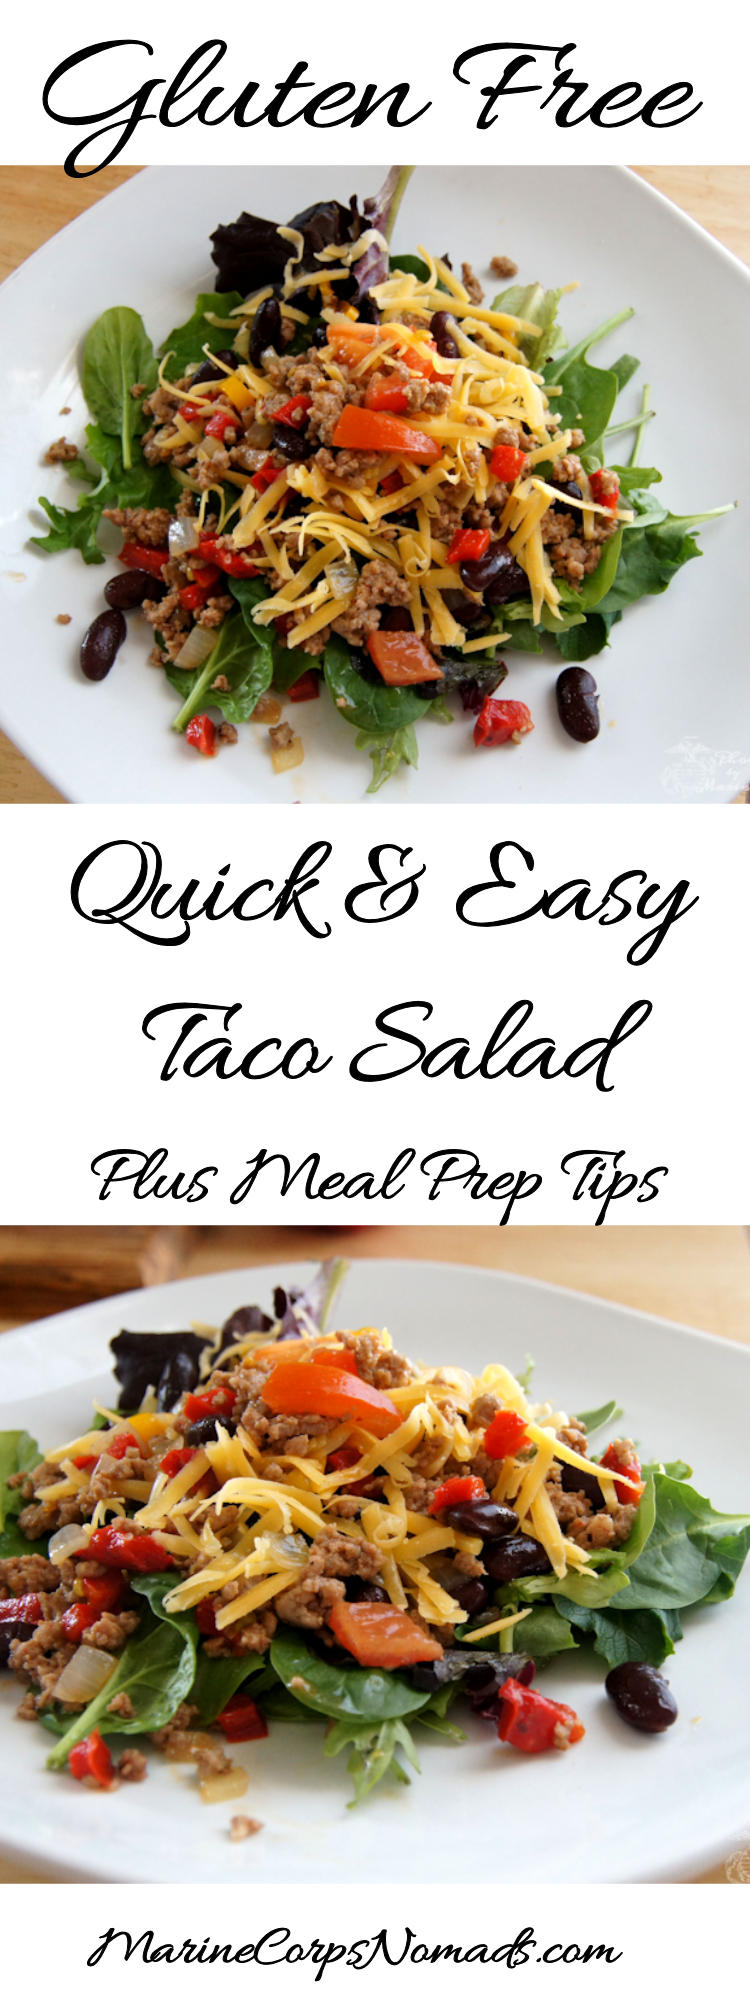 Quick and Easy Taco Salad with Meal Prep Tips | Gluten Free | Marine Corps Nomads